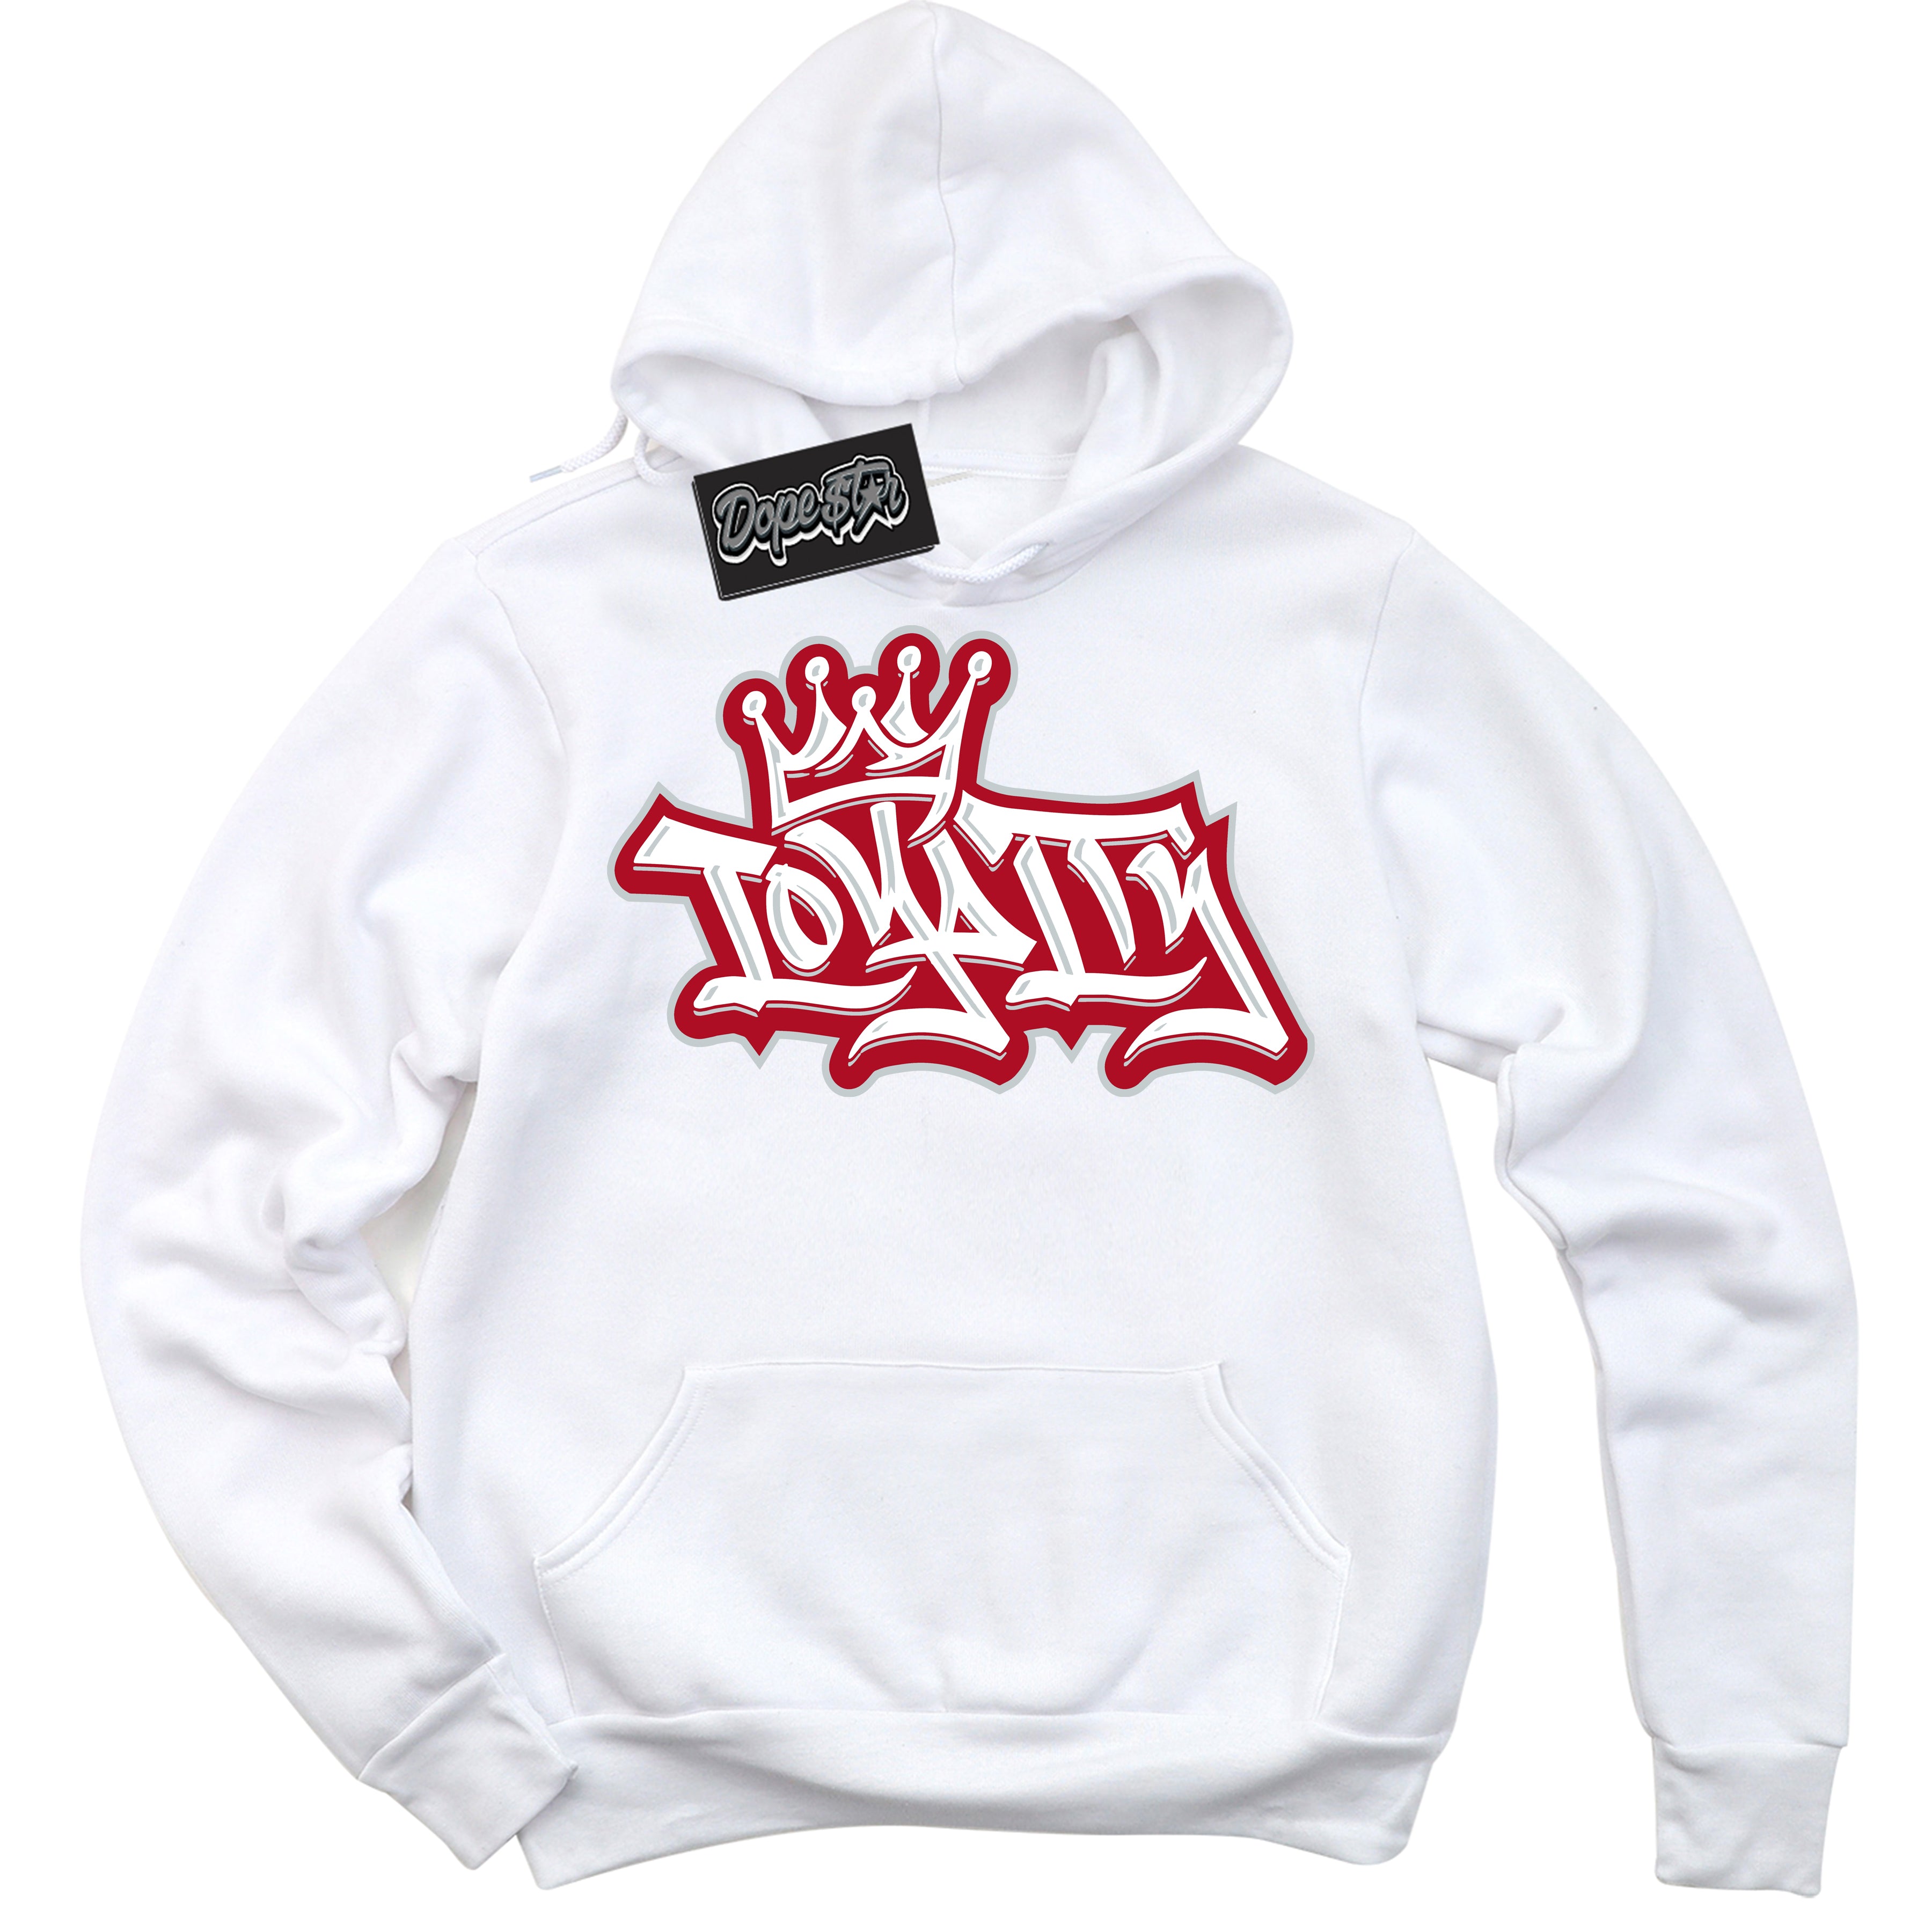 Cool White Hoodie with “ Loyalty Crown ”  design that Perfectly Matches  Reverse Ultraman Sneakers.